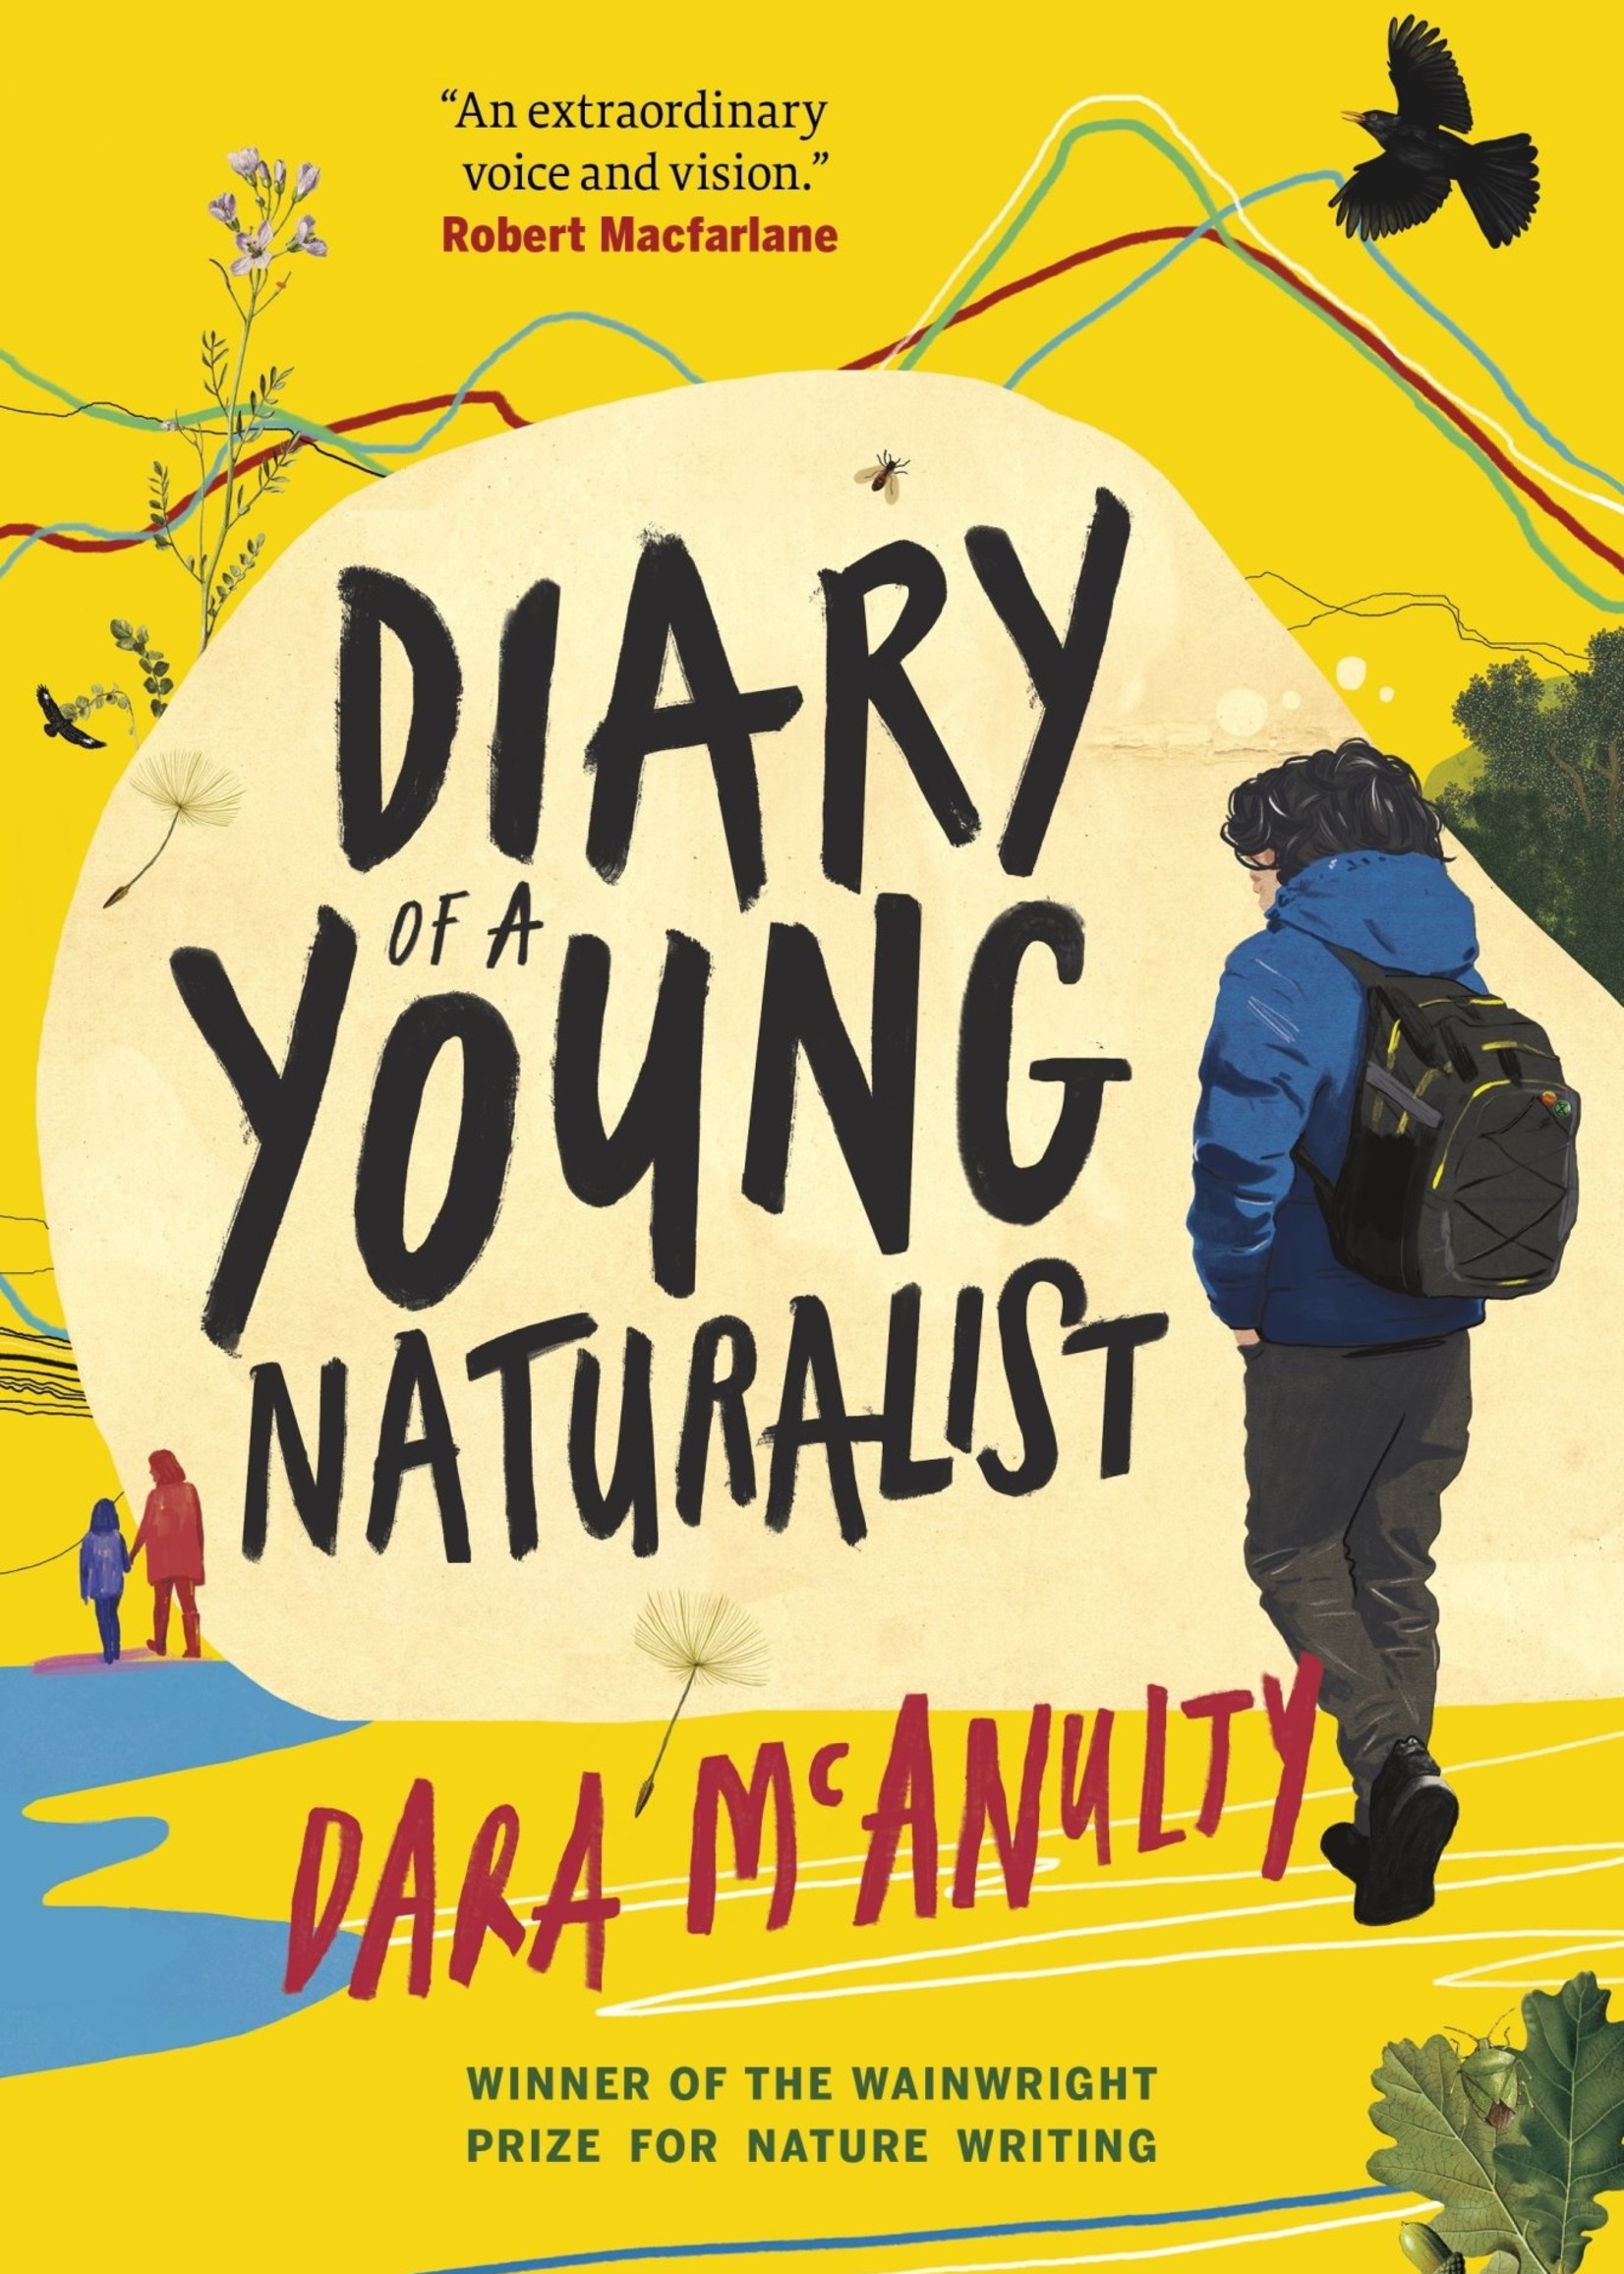 Diary of a Young Naturalist by Dara McAnulty